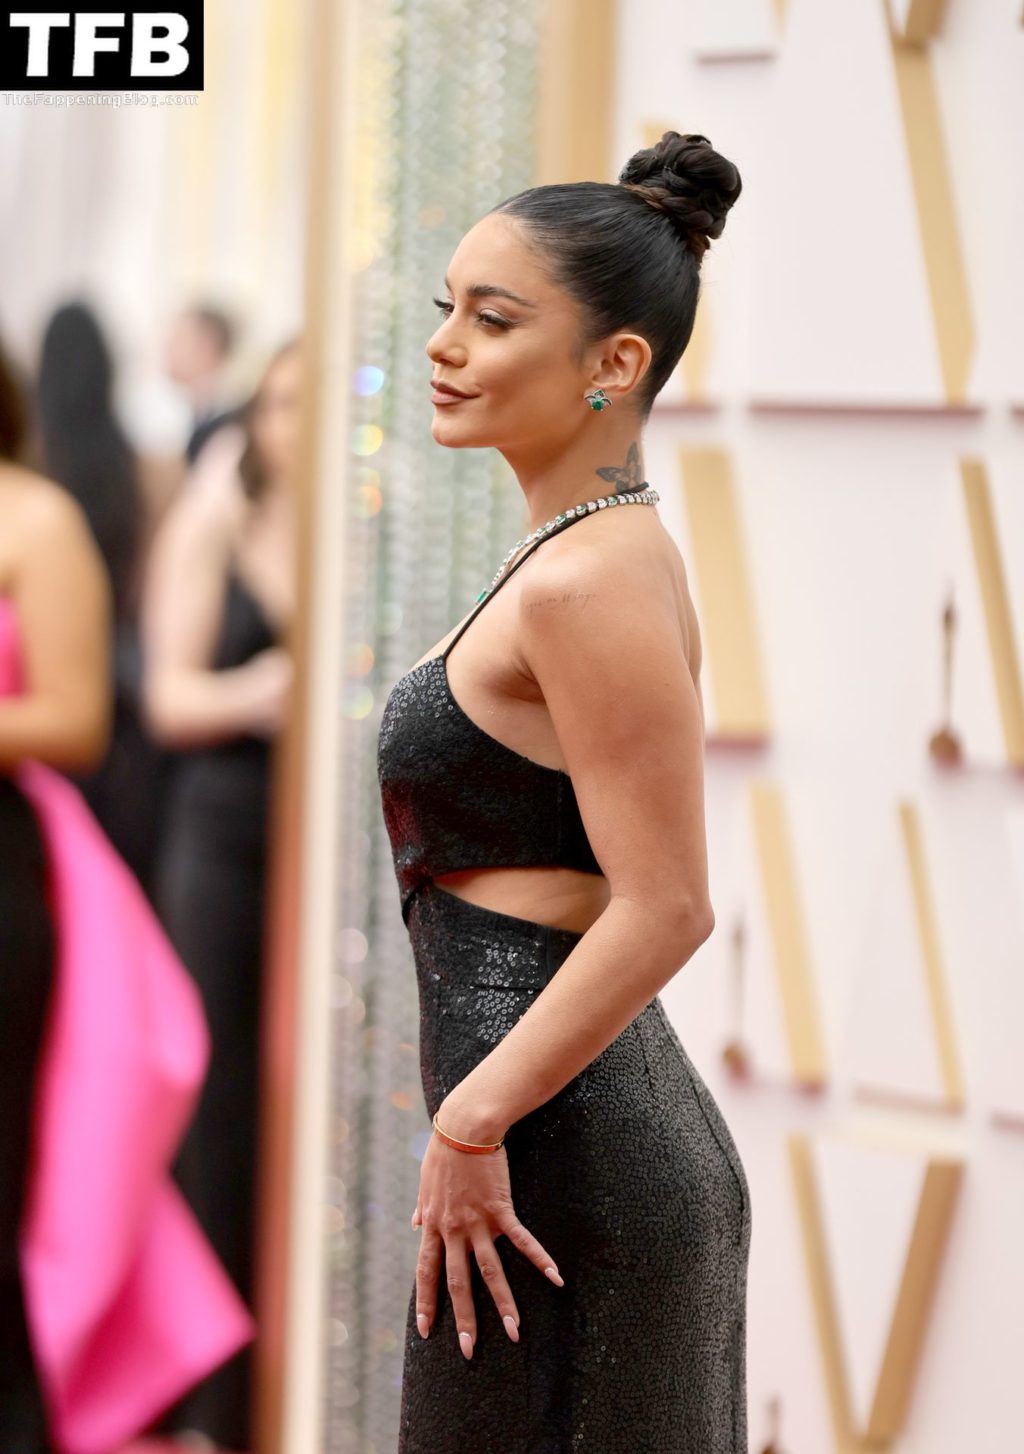 Vanessa Hudgens Sexy The Fappening Blog 28 4 1024x1454 - Vanessa Hudgens Poses on the Red Carpet at the 94th Annual Academy Awards (83 Photos)